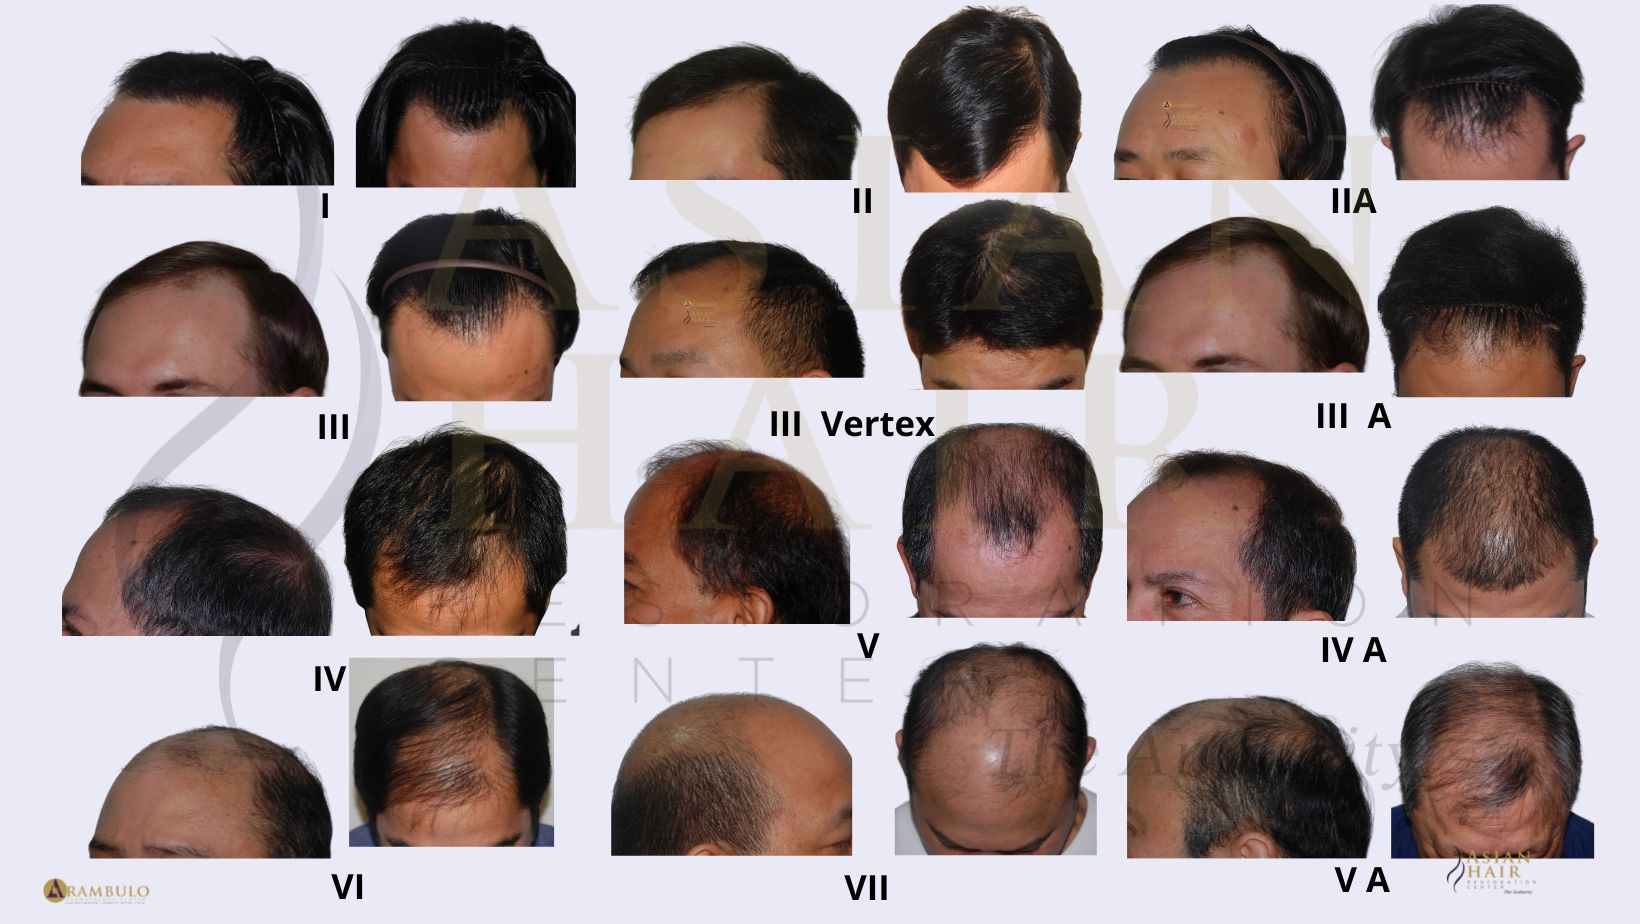 Top more than 64 androgenic hair loss - in.eteachers